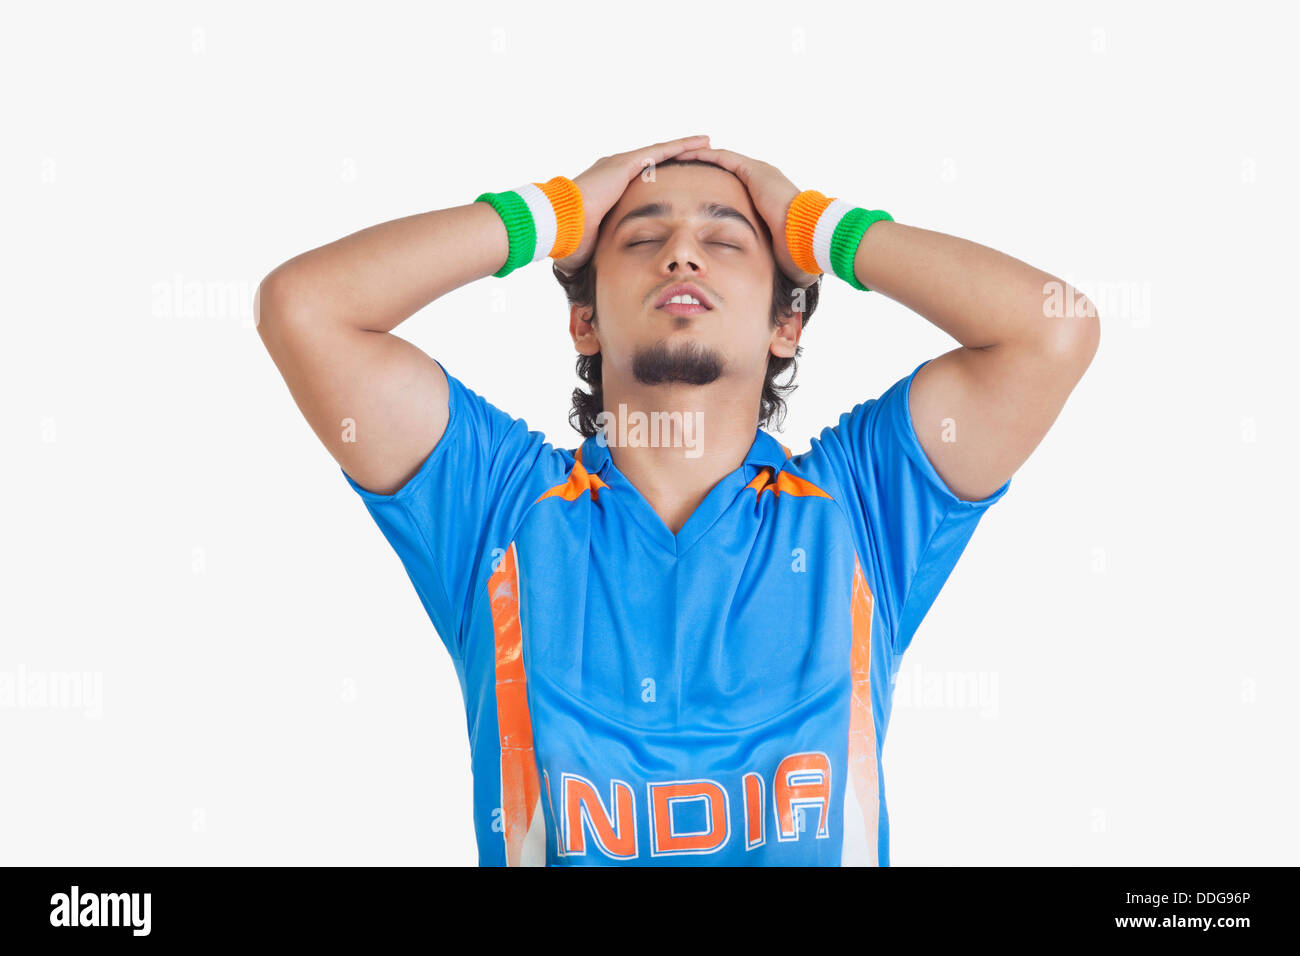 Displeased young man in Indian cricket team jersey standing with hands on head over white background Stock Photo